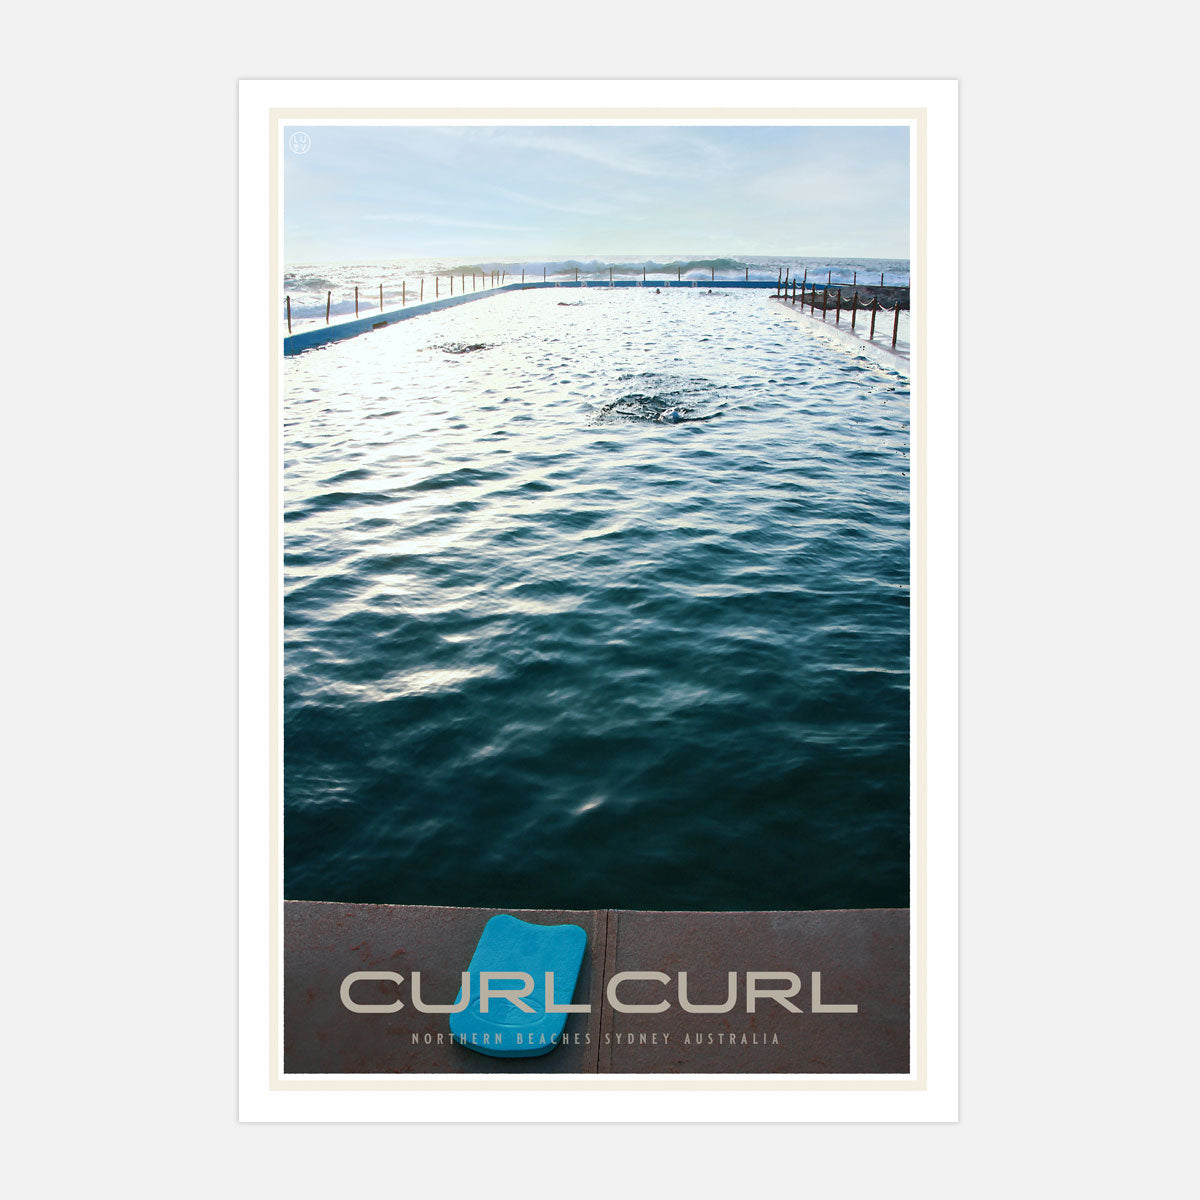 Curl curl pool retro vintage travel poster from places we luv